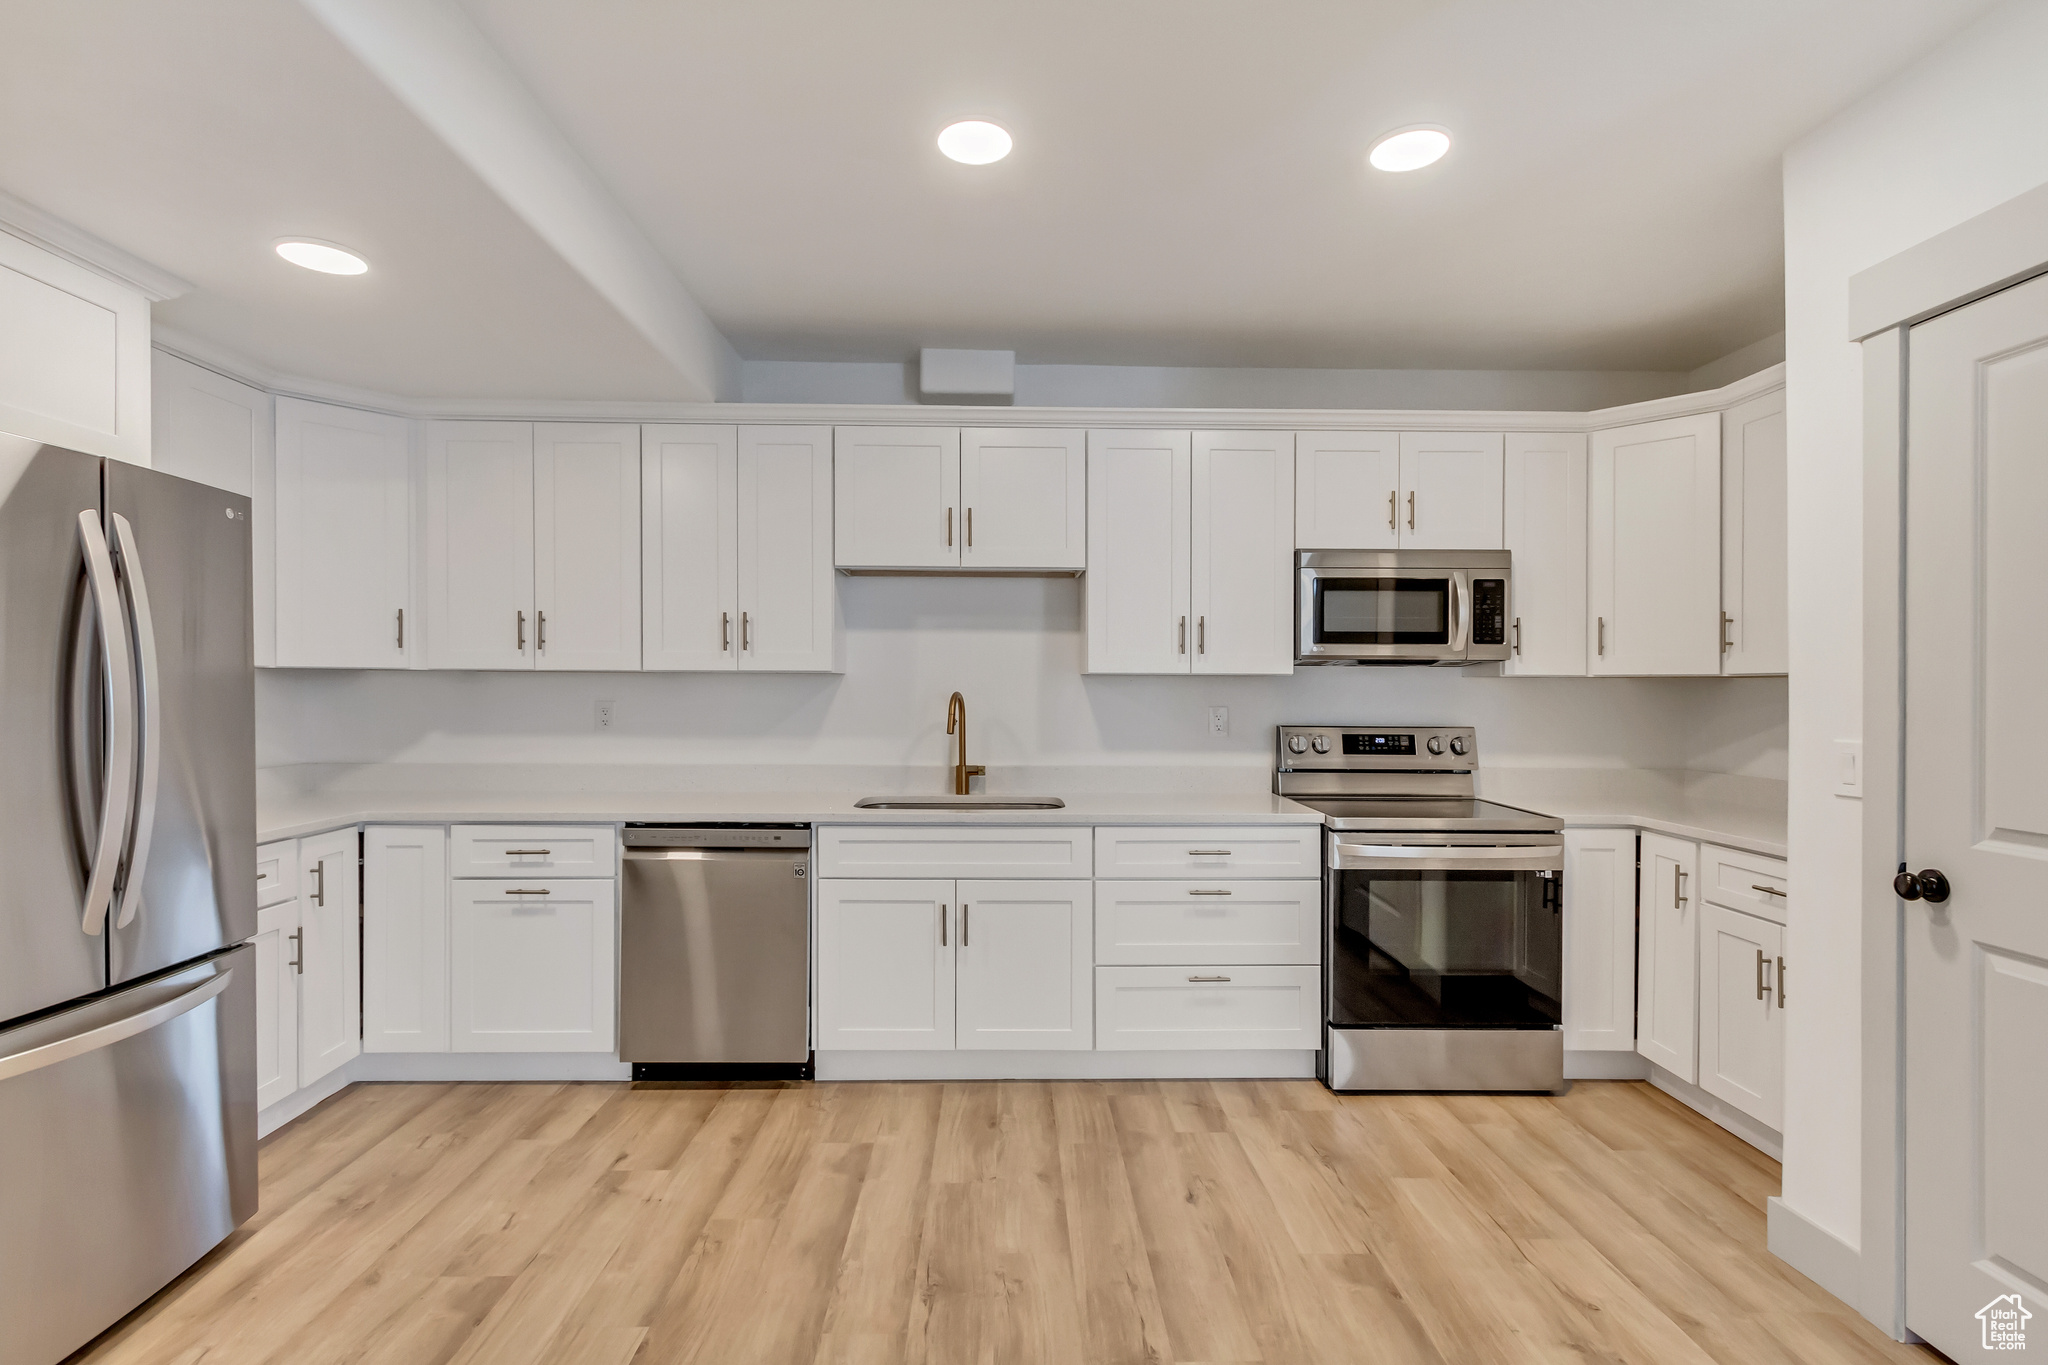 Kitchen featuring white cabinets, sink, appliances with stainless steel finishes, and light wood-type flooring